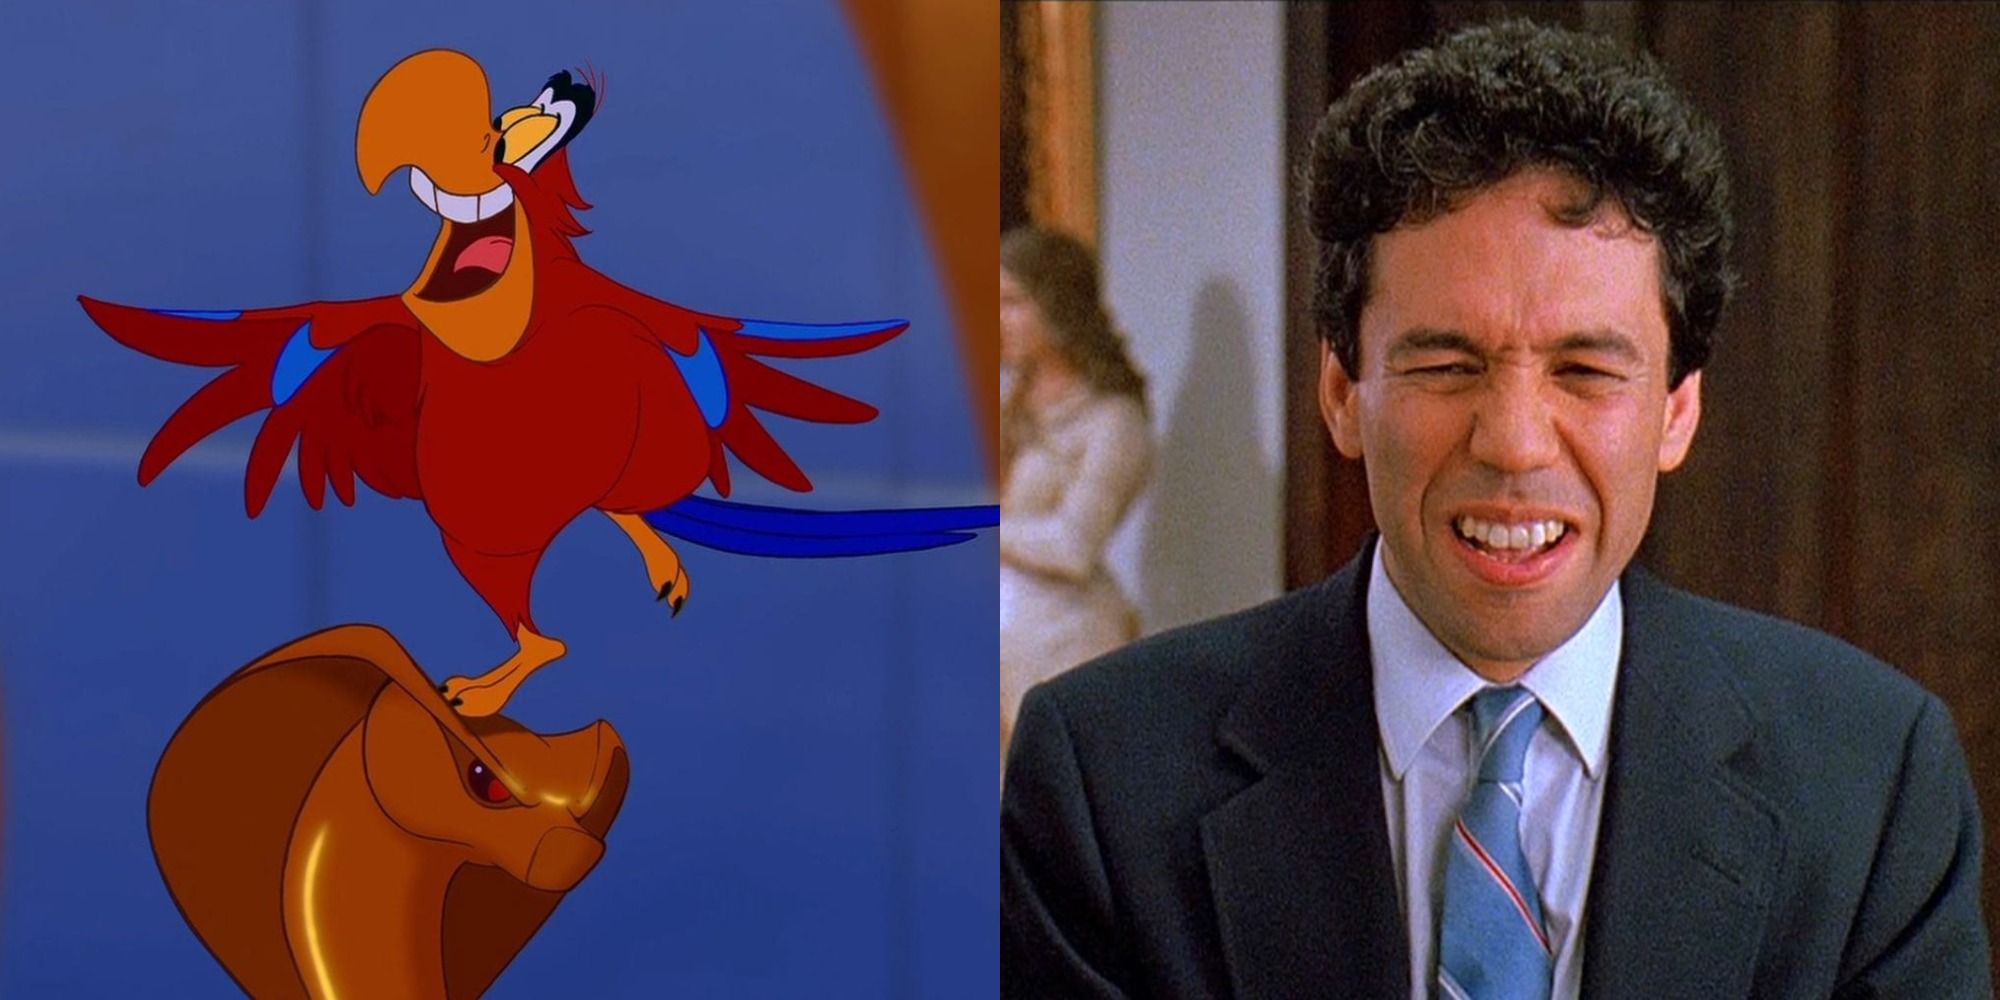 Split image showing Iago in Aladdin and Mr Peabody in Problem Child.